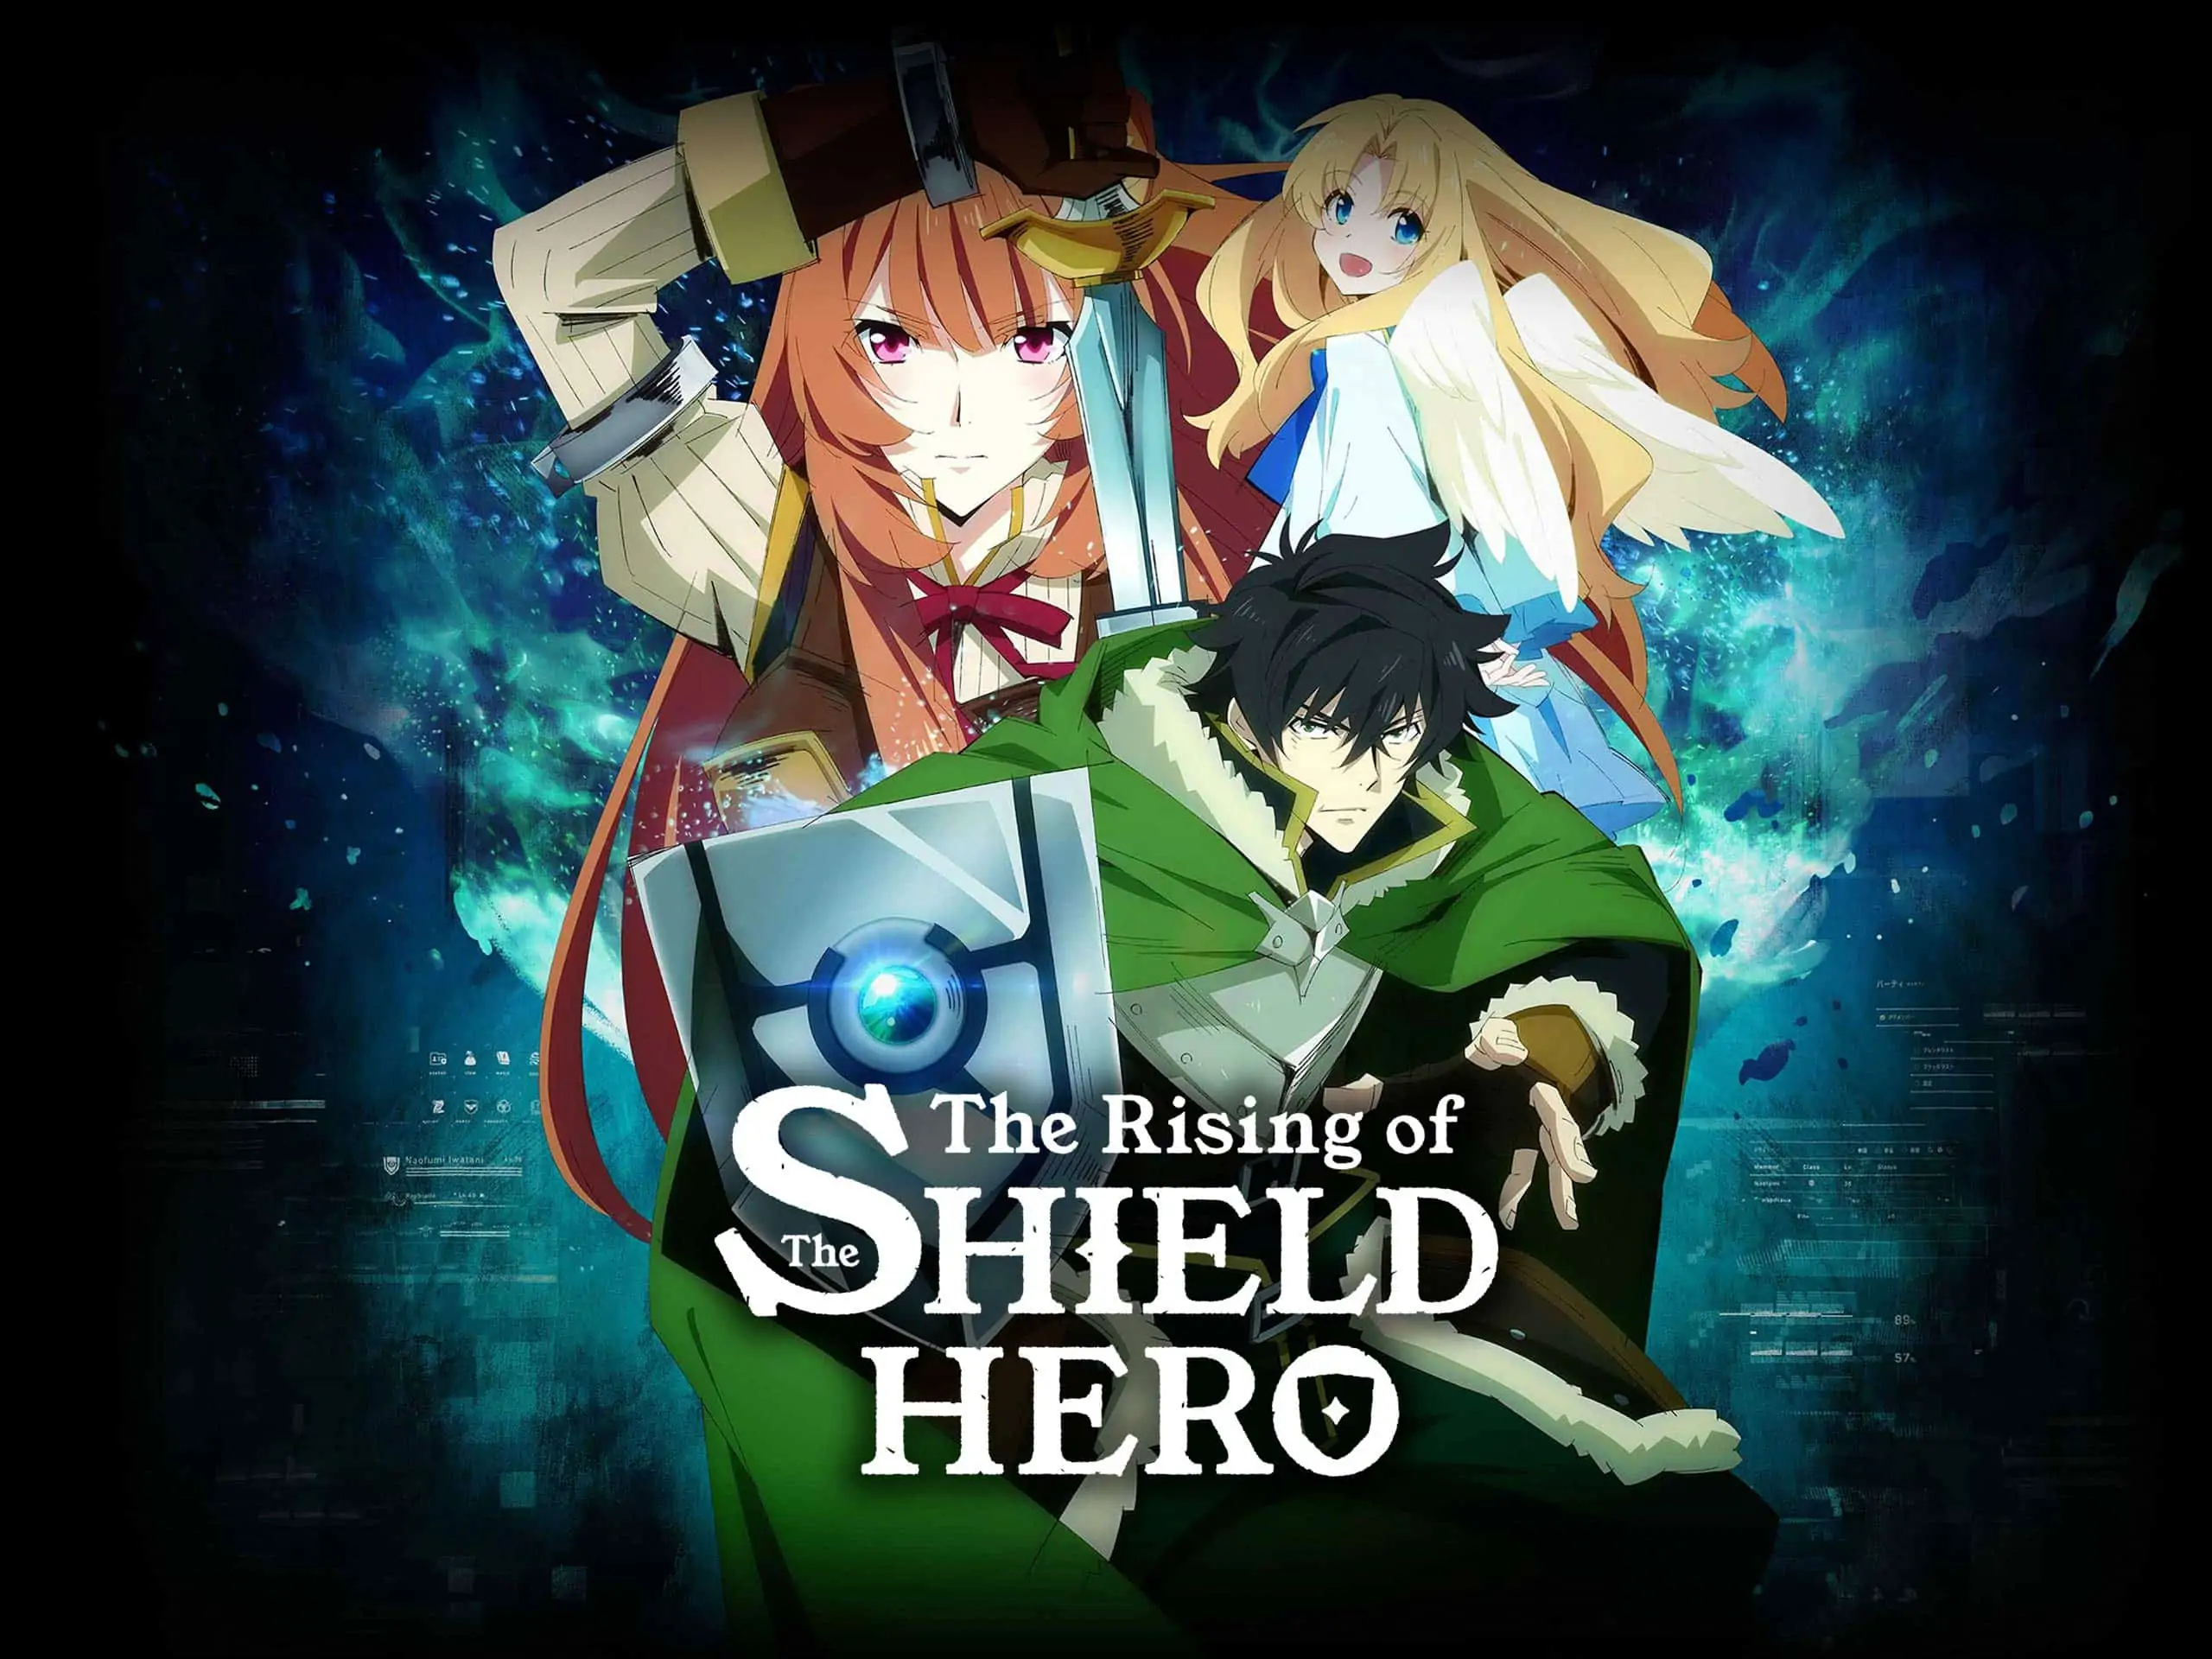 Everything About “The Rising of the Shield Hero” Season 2